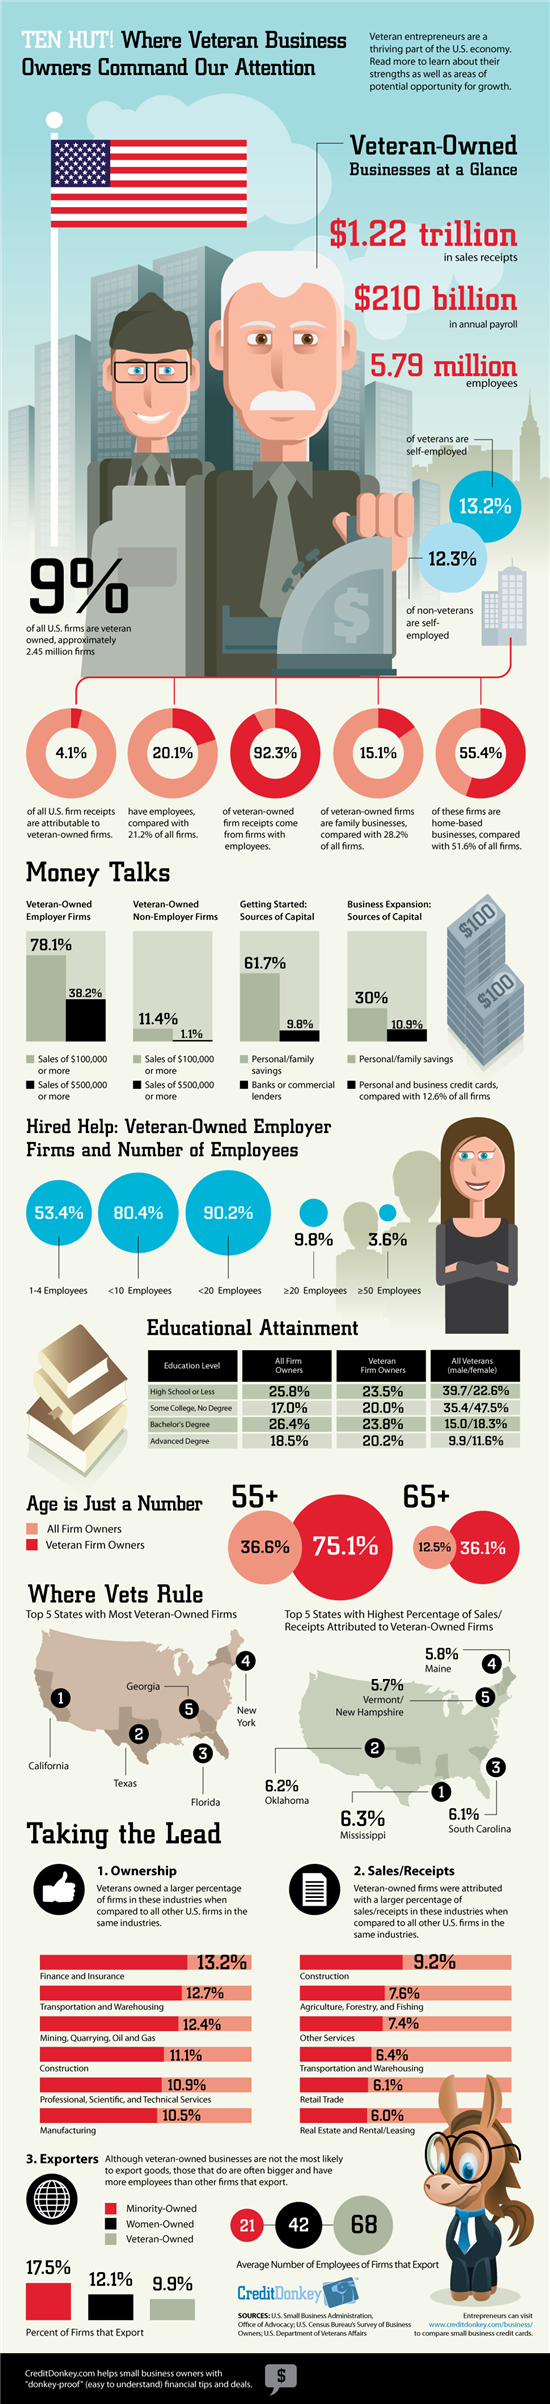 Infographic: Veteran Business Owners